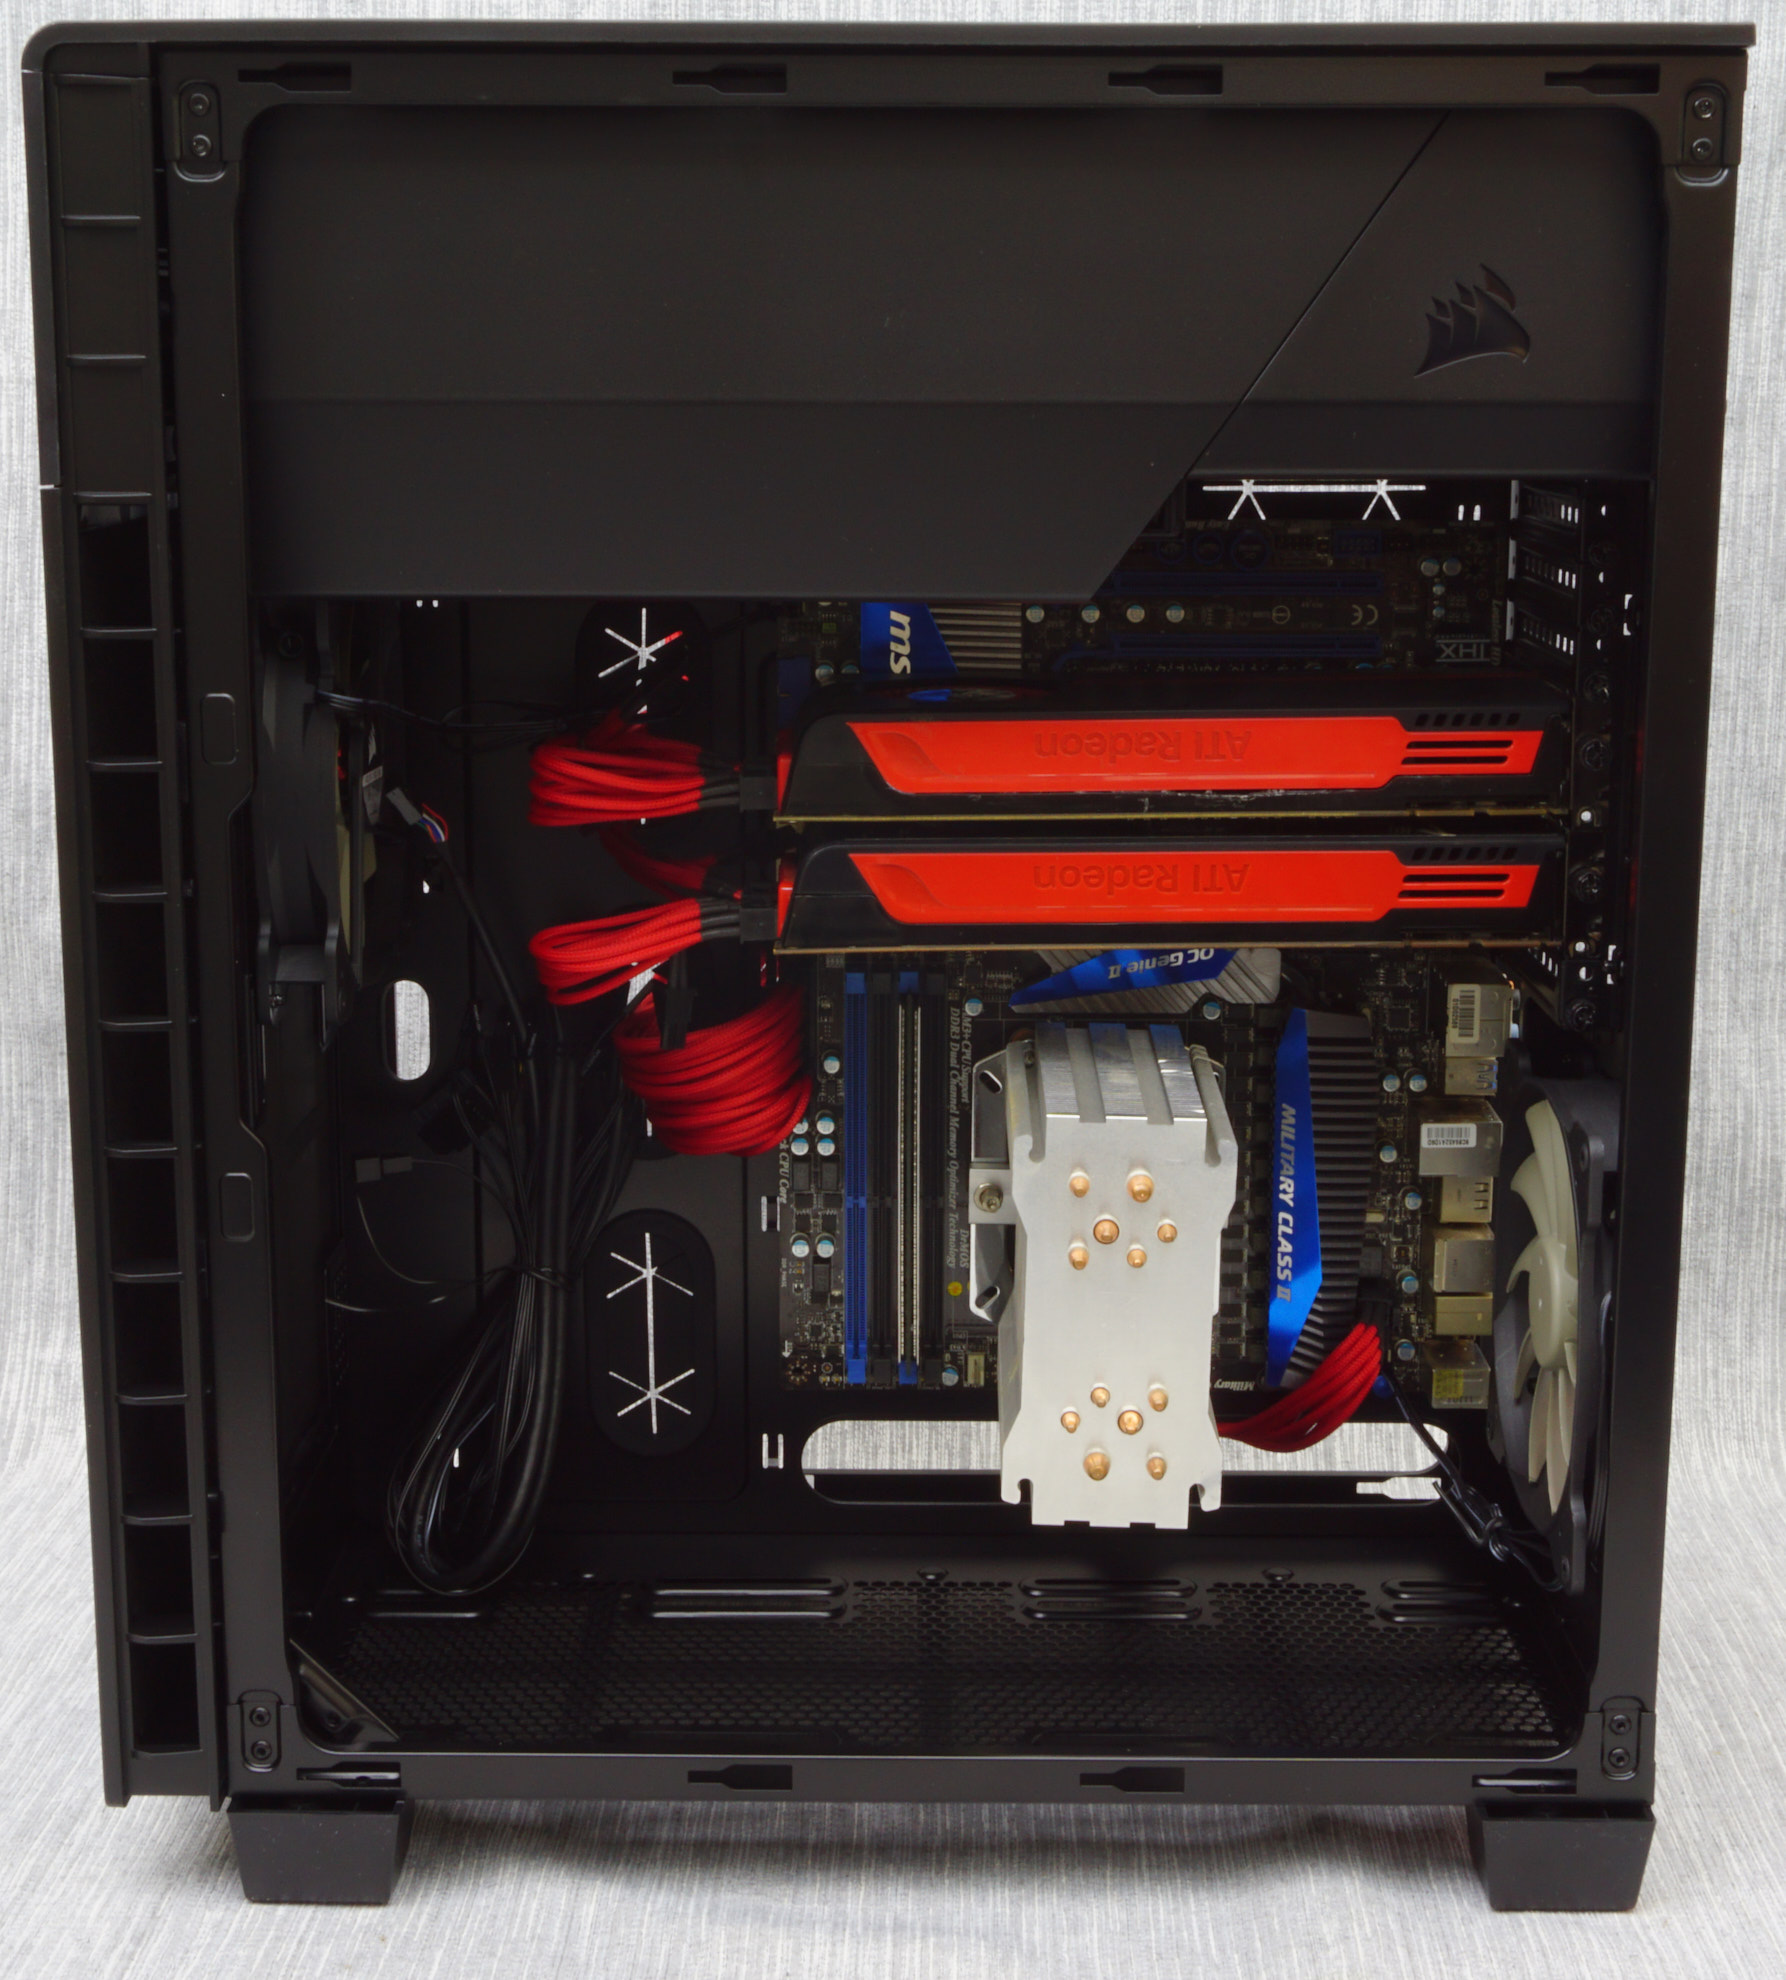 Words Conclusion - The Corsair Carbide Case Review: Upside Down But Right On